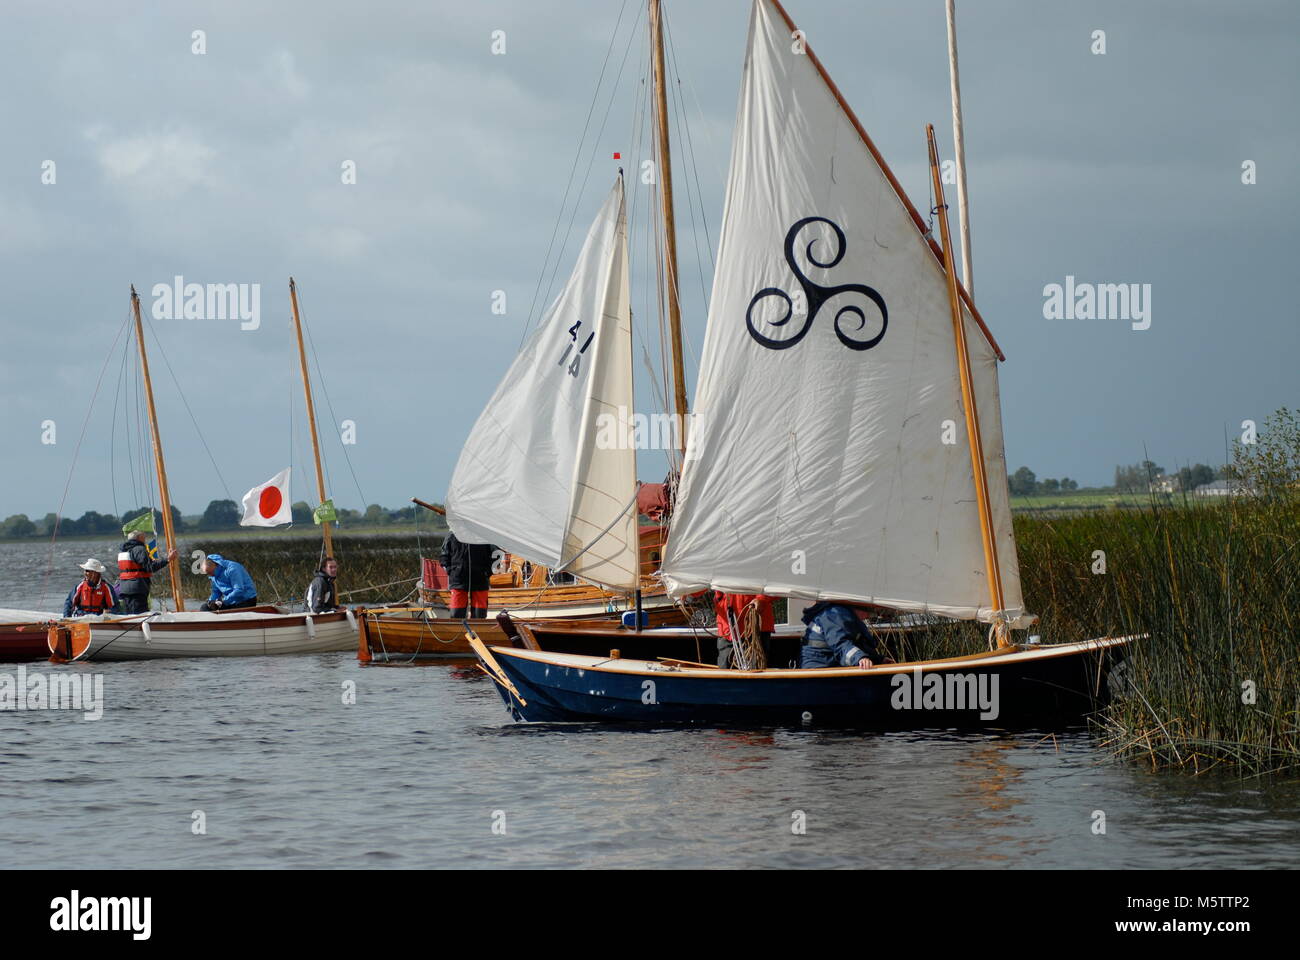 Sail boats moored up in the reeds on the banks of the Shannon River in Ireland. Stock Photo